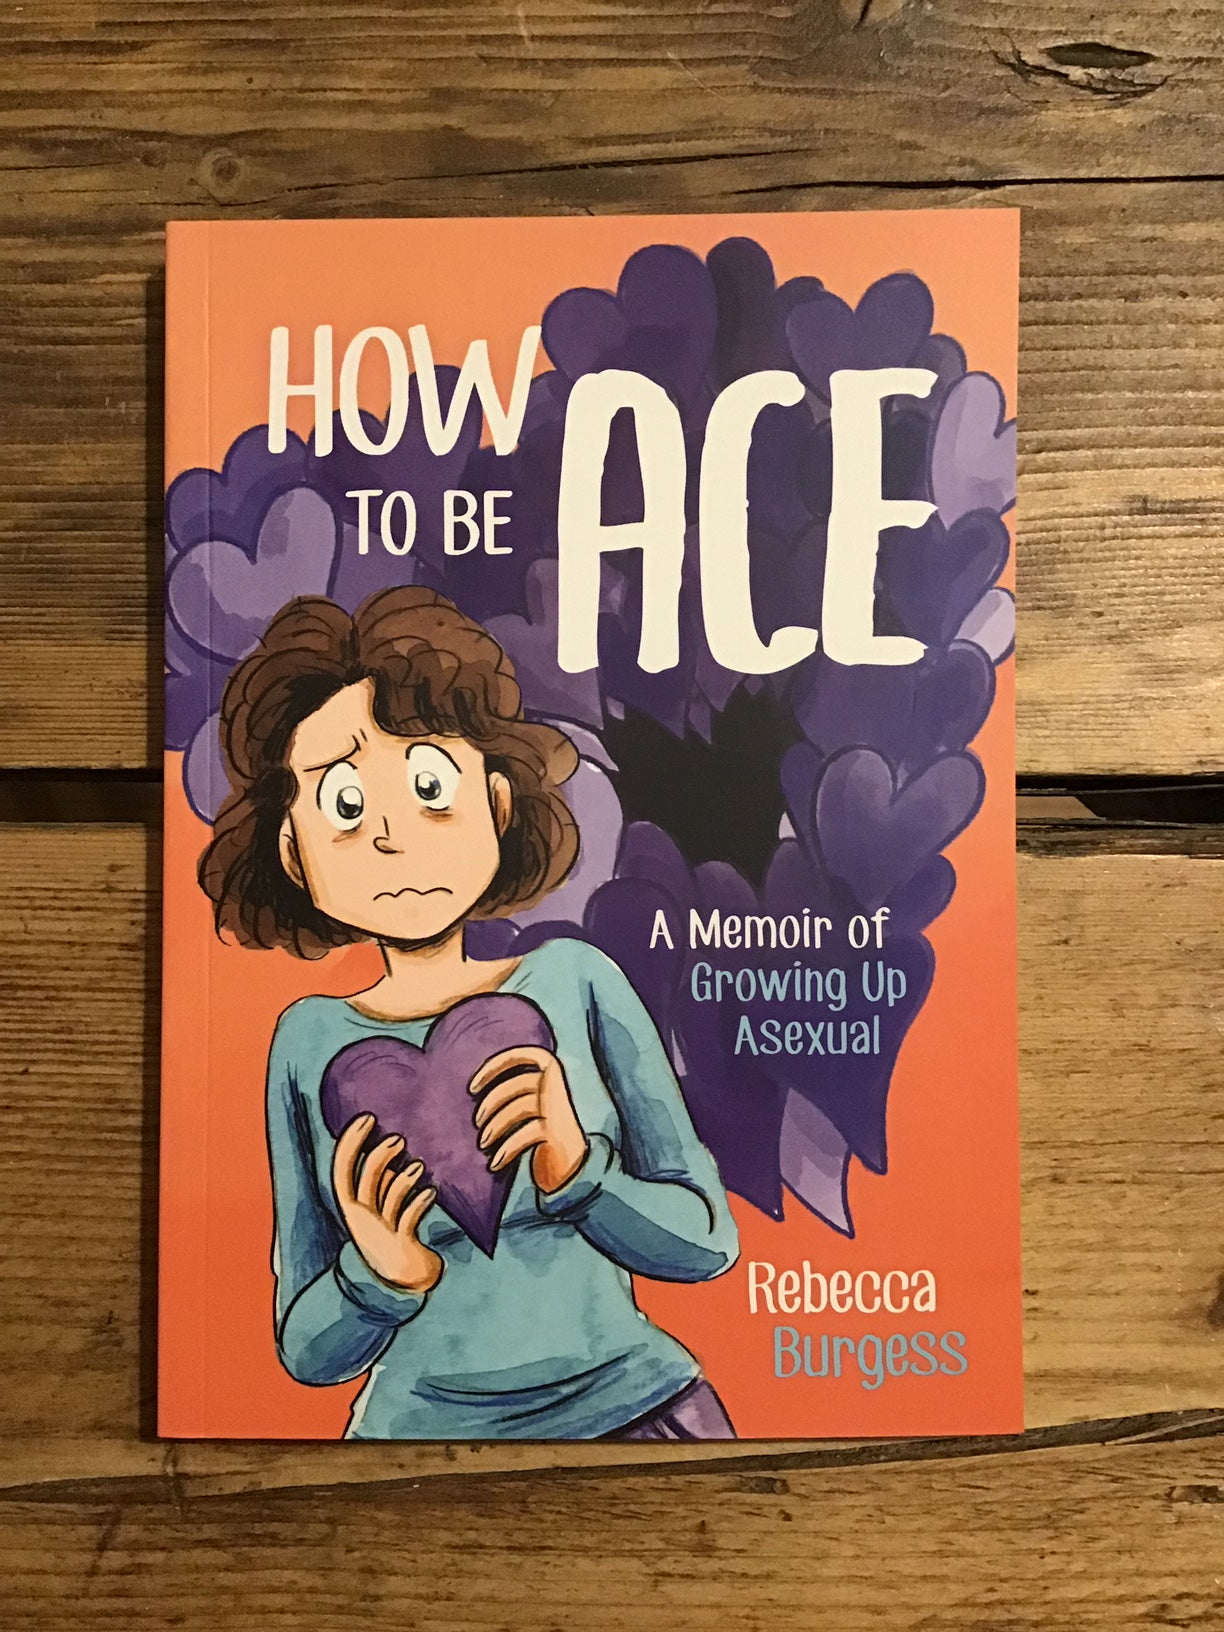 How to be Ace